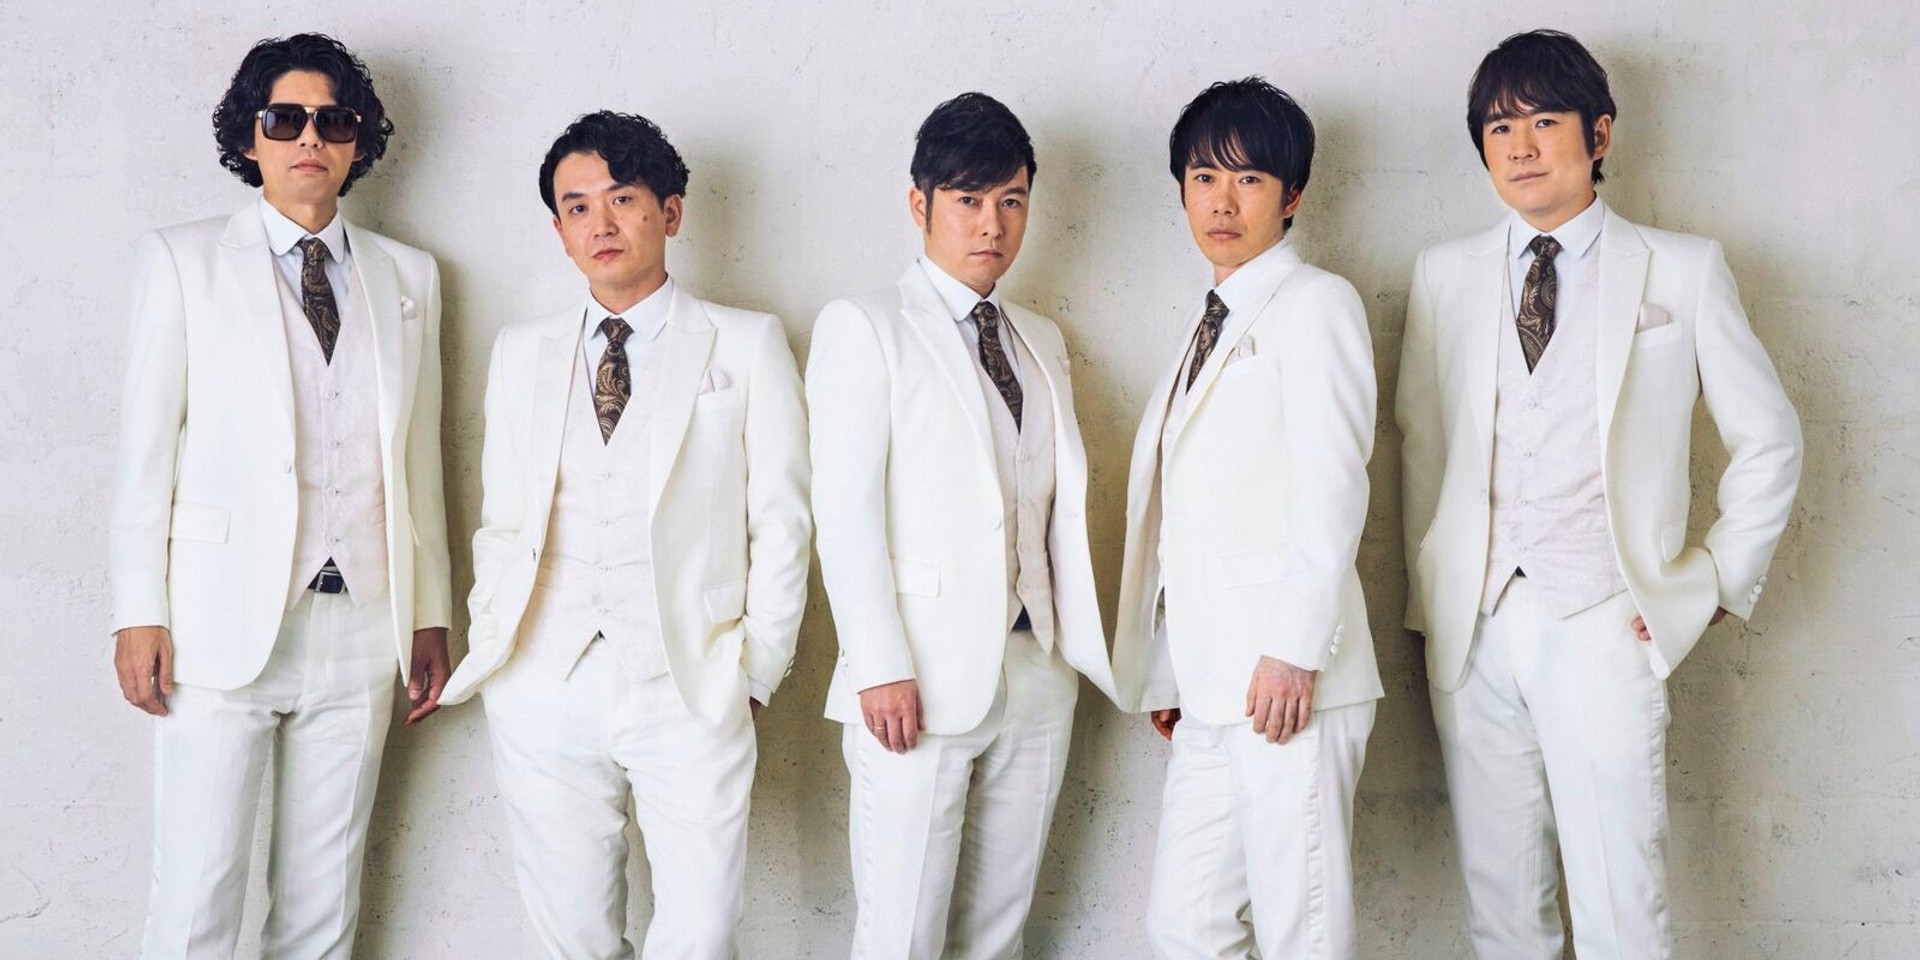 The Gospellers, Japan's premier R&B vocal group, started out as buskers